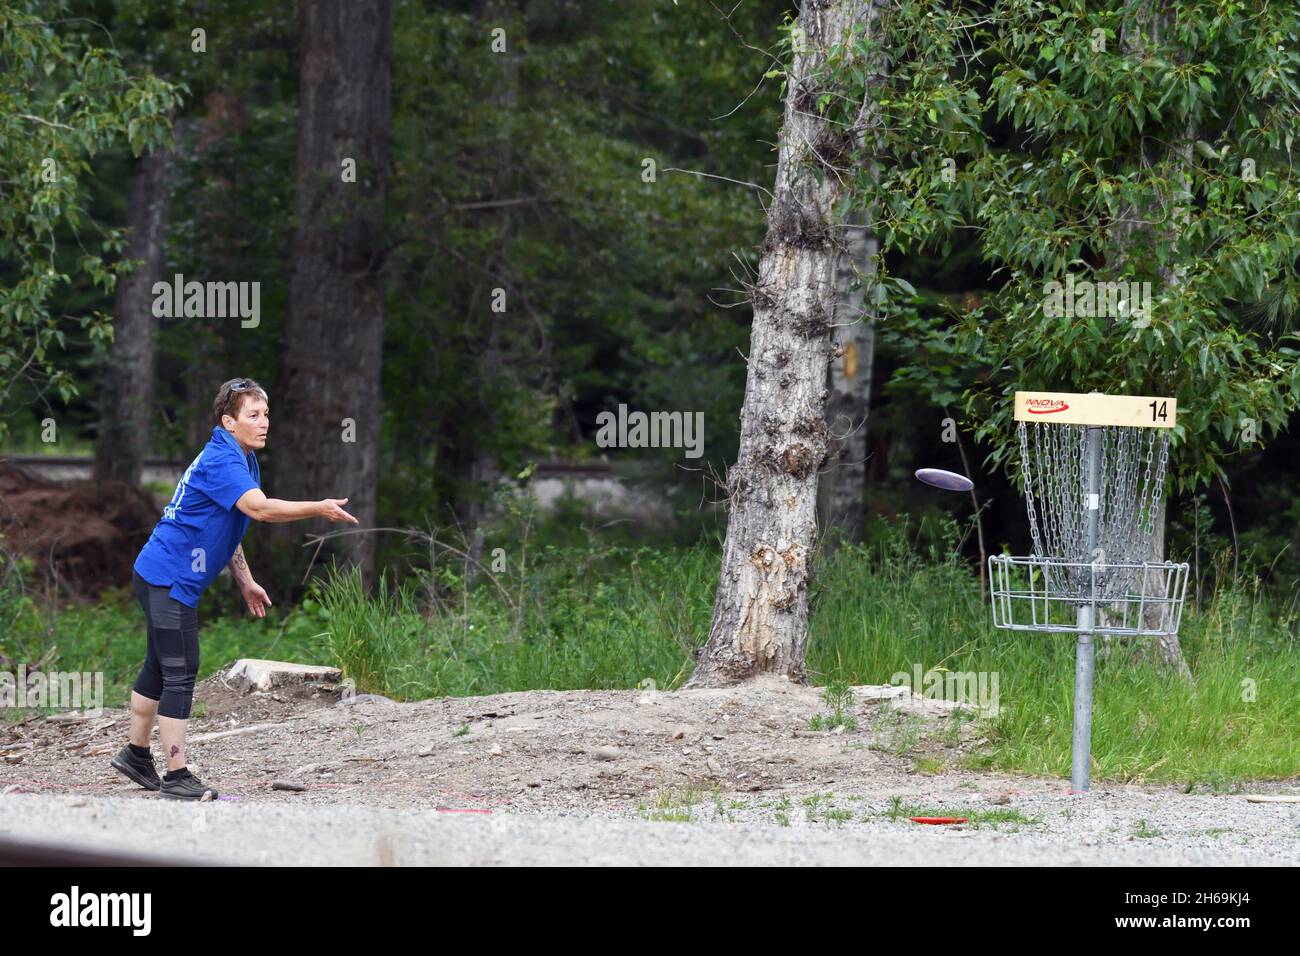 Playing disc golf at the Timber Beast Disc Golf Course in Troy, northwest Montana. (Photo by Randy Beacham) Stock Photo